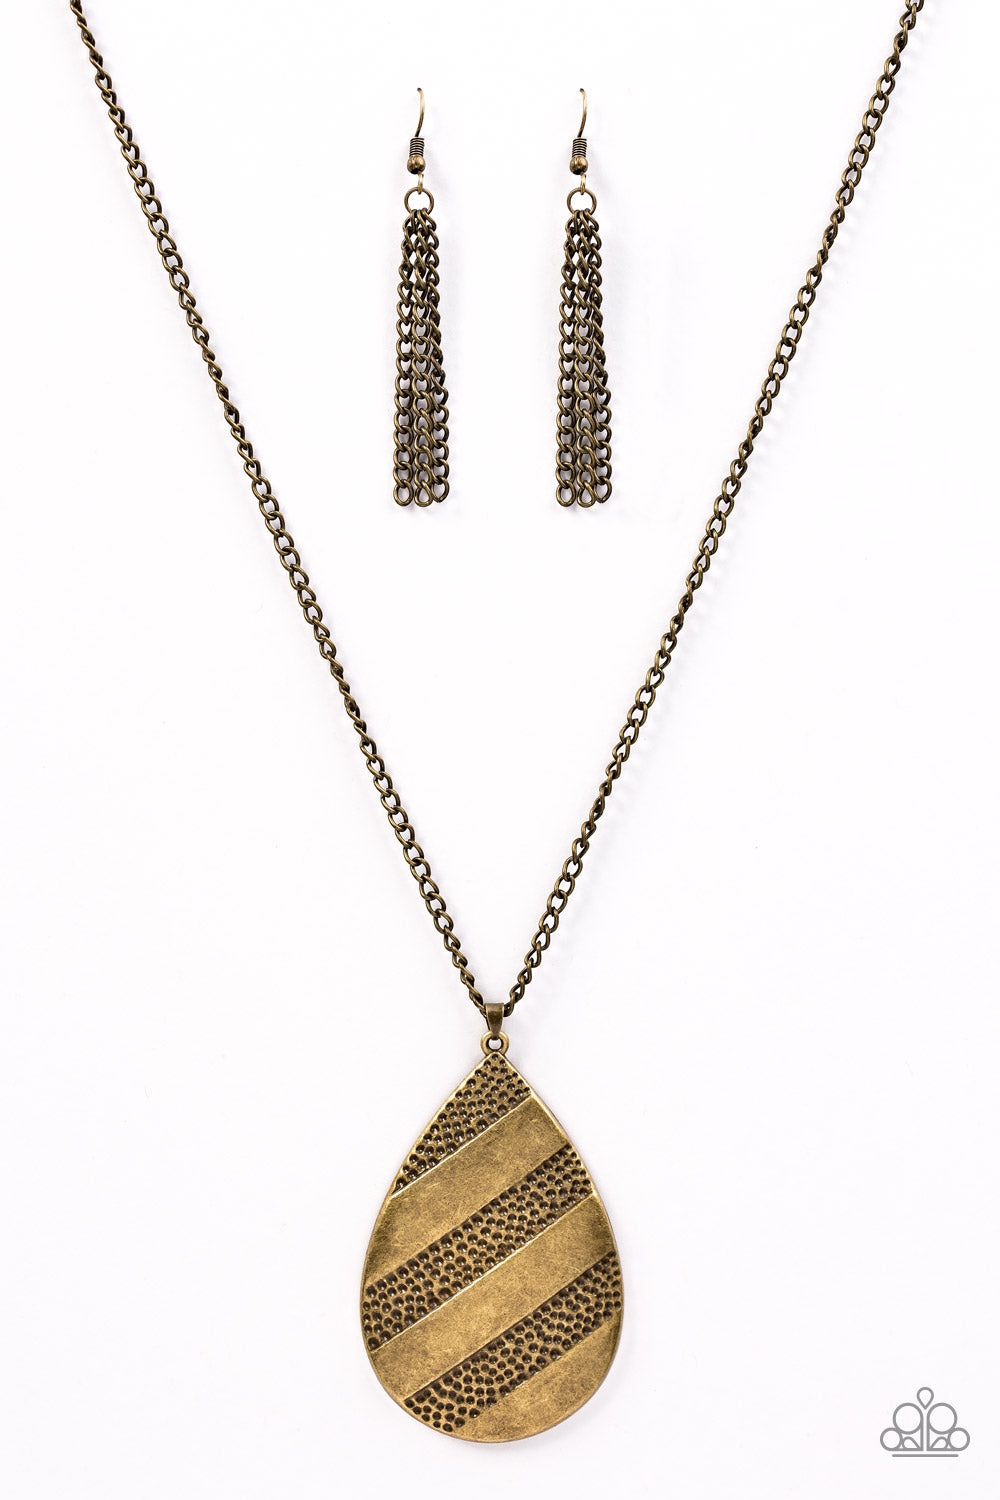 A Chance Of Thunderstorms - Brass necklace